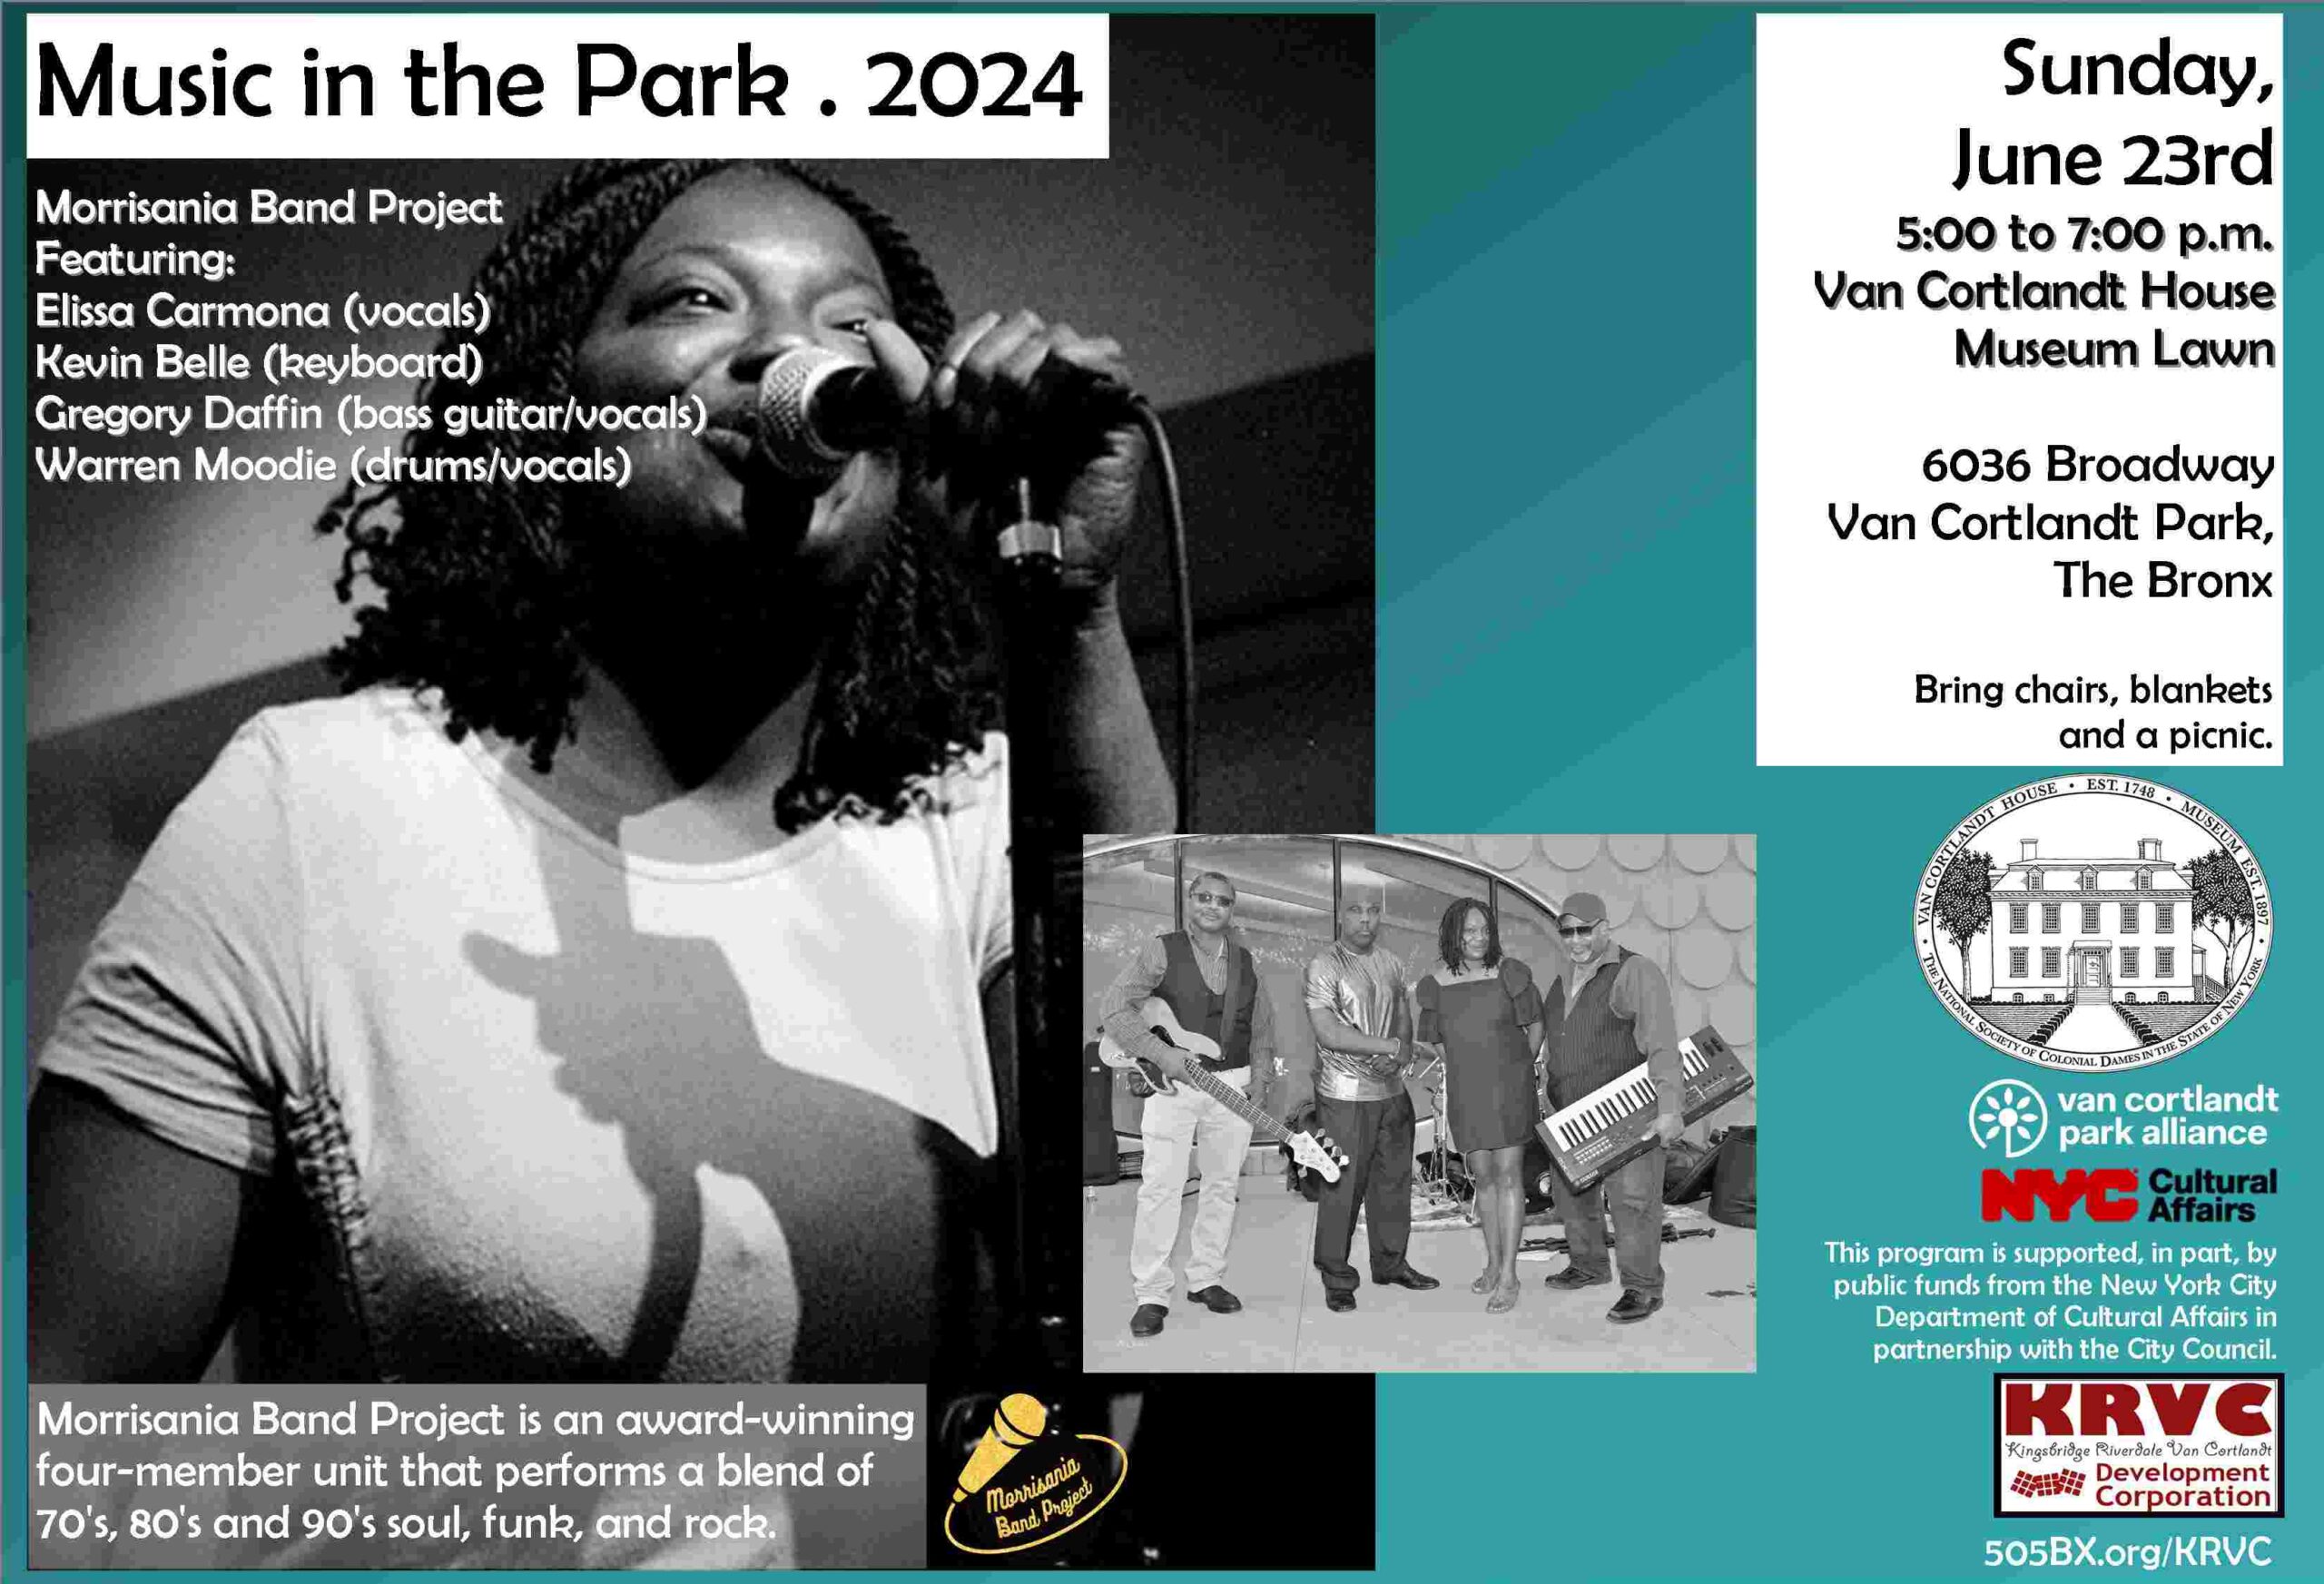 A flyer with the image of a woman singing and a photo of 4 people with instruments along with text about a concert in the park.